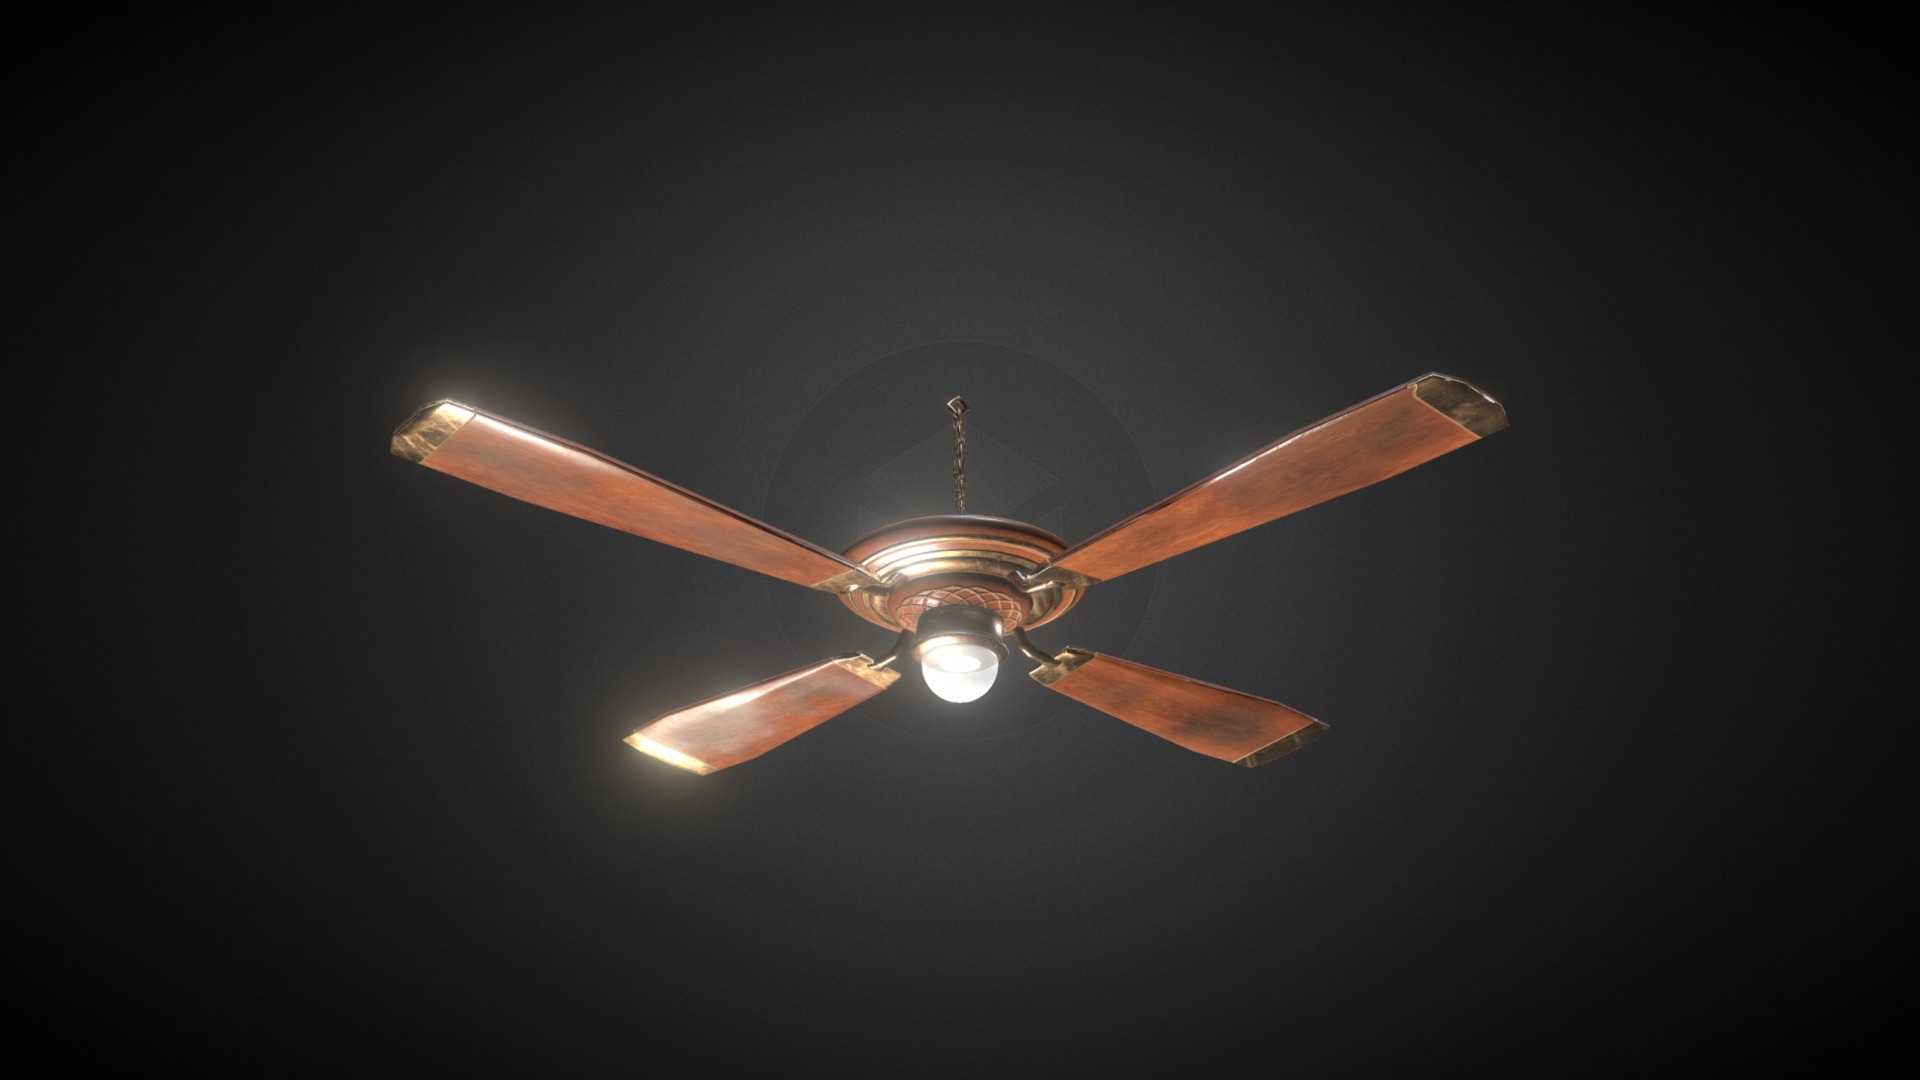 3D model Ceiling fan - This is a 3D model of the Ceiling fan. The 3D model is about a ceiling fan with a light on top.